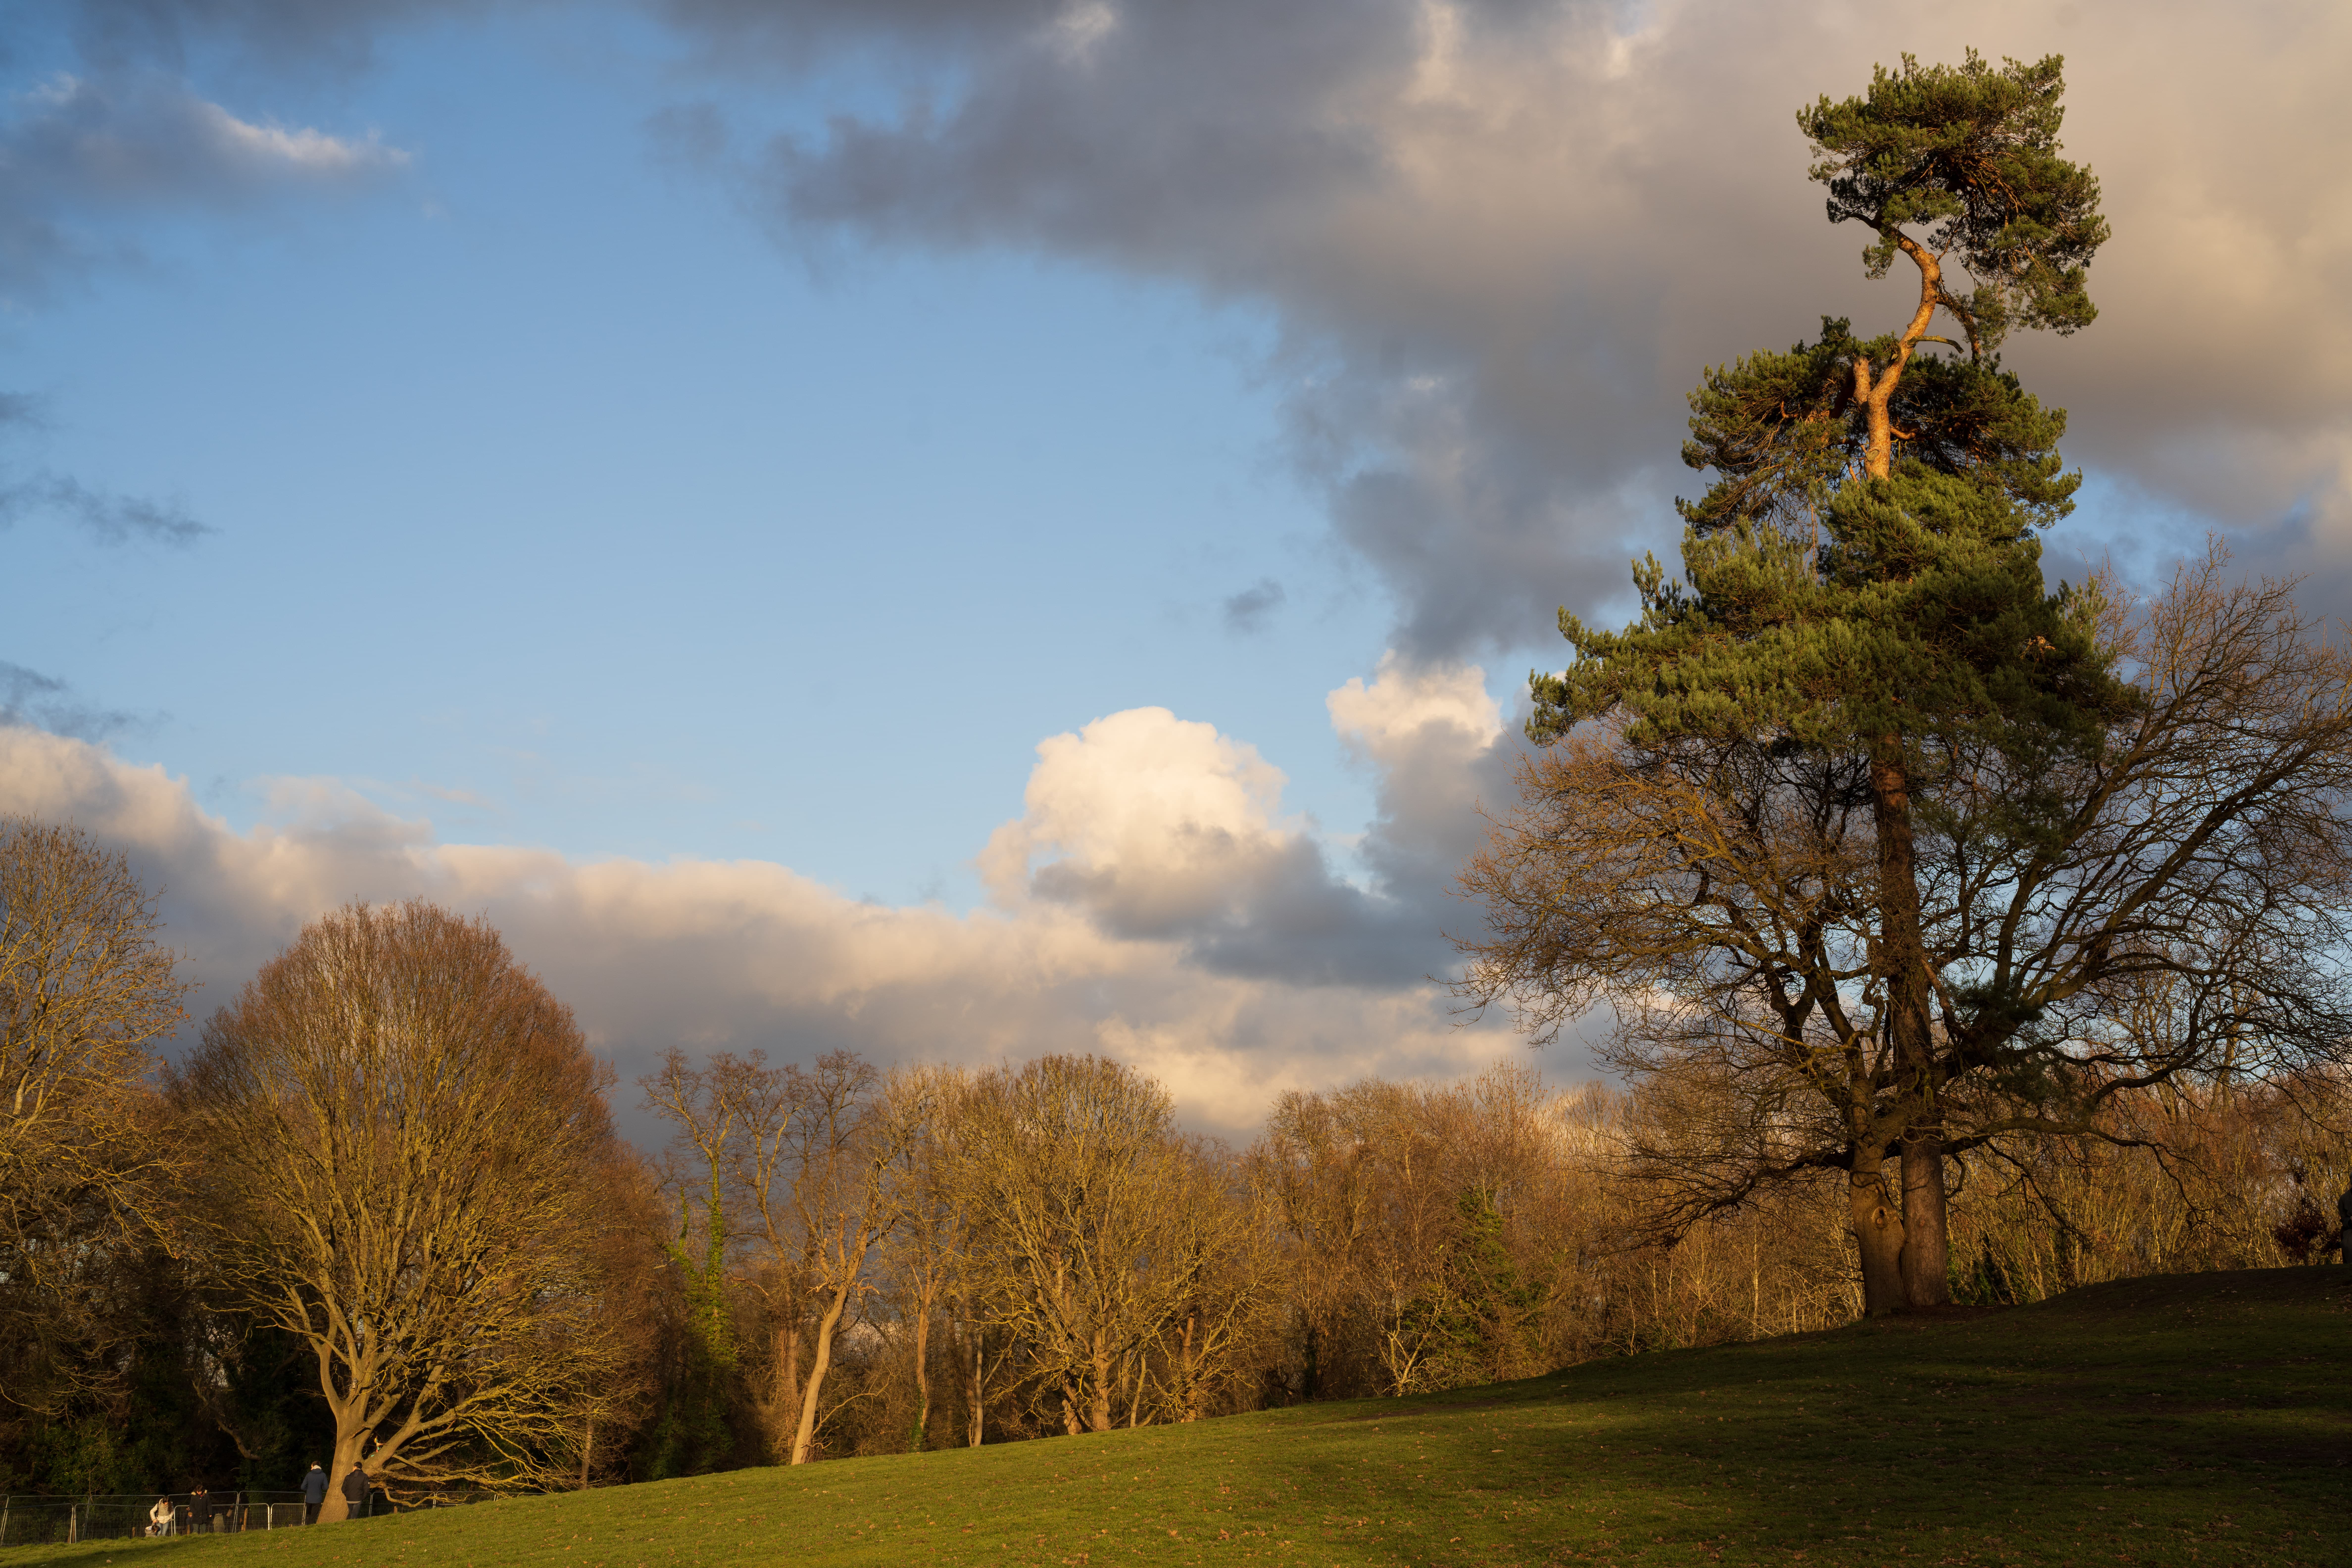 Sony FE 50mm f/1.2 GM sample image, park with bare trees and a pine